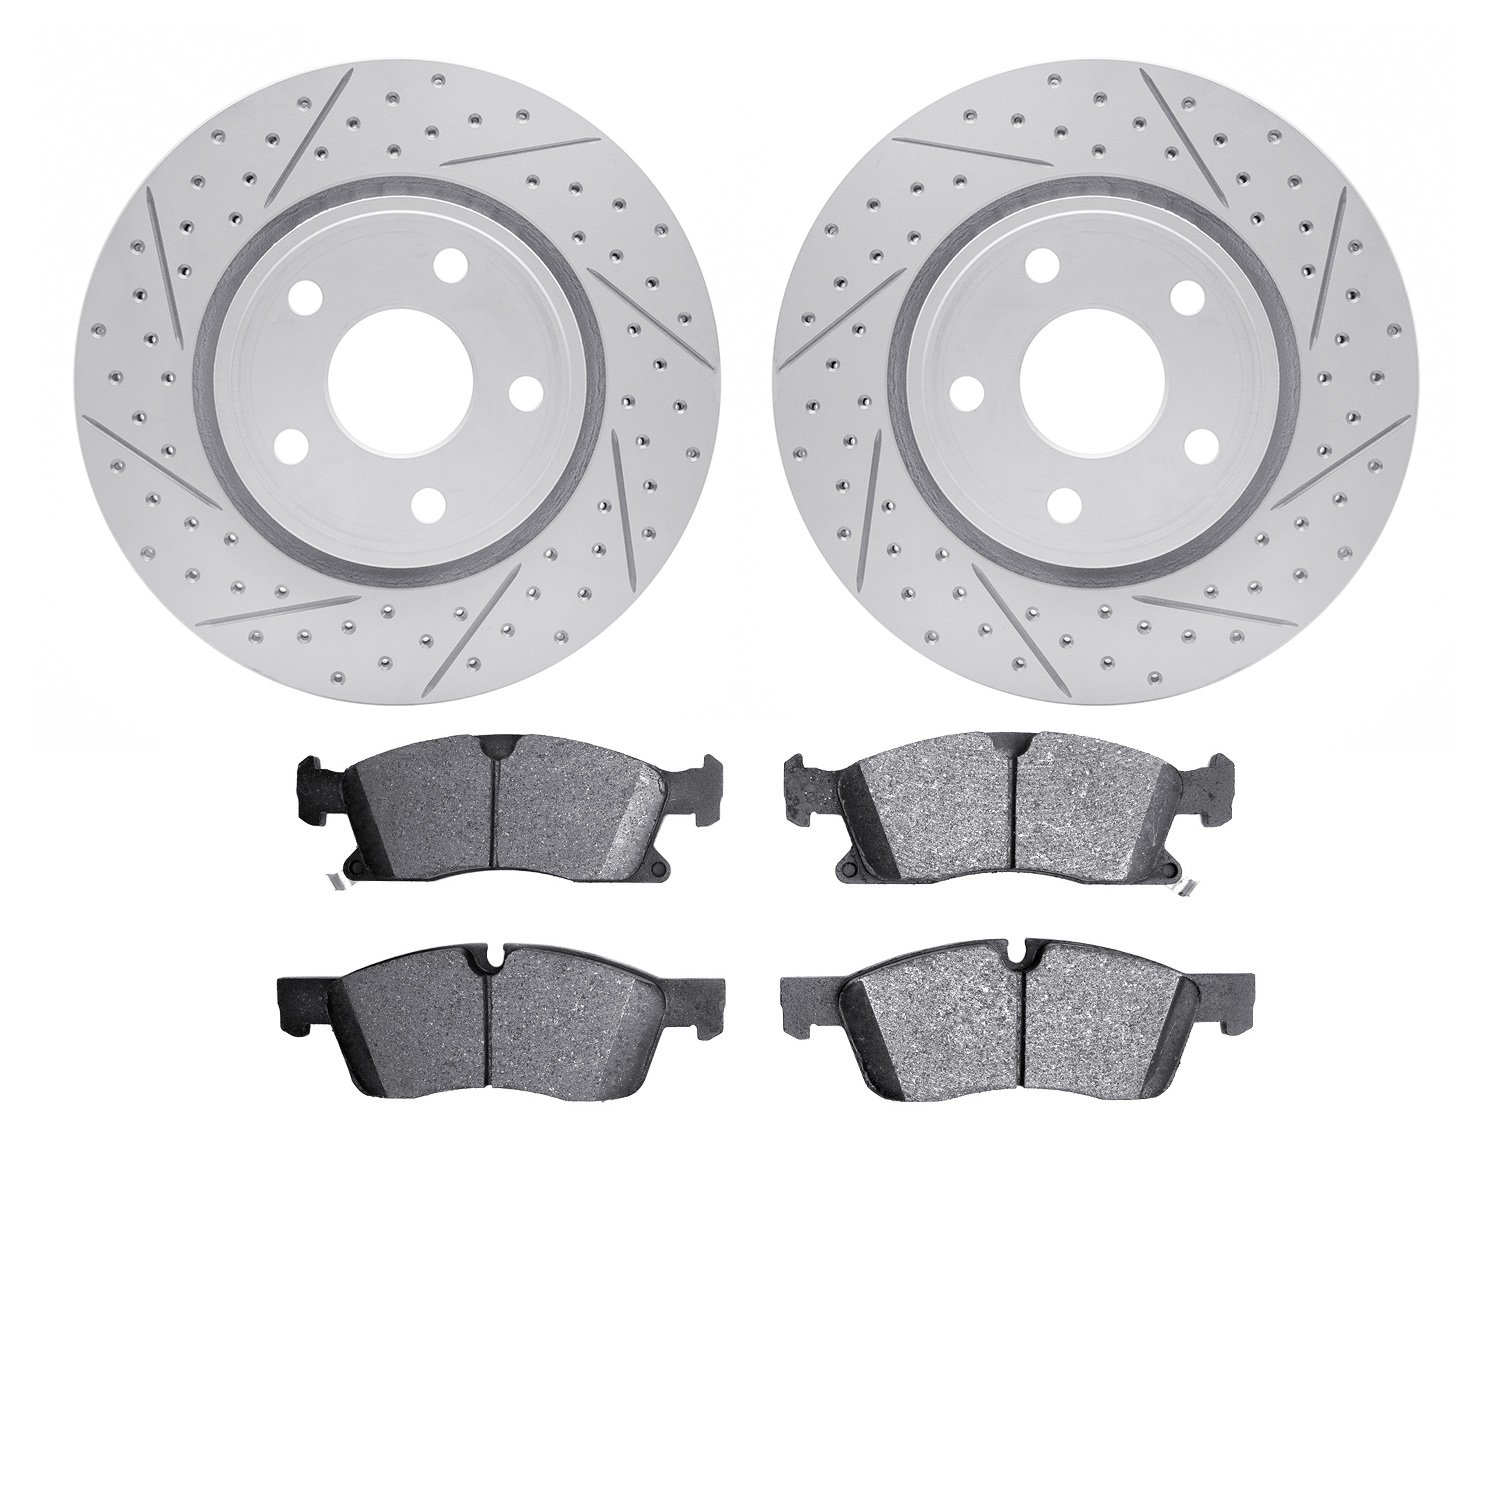 2202-42002 Geoperformance Drilled/Slotted Rotors w/Heavy-Duty Pads Kit, Fits Select Mopar, Position: Front